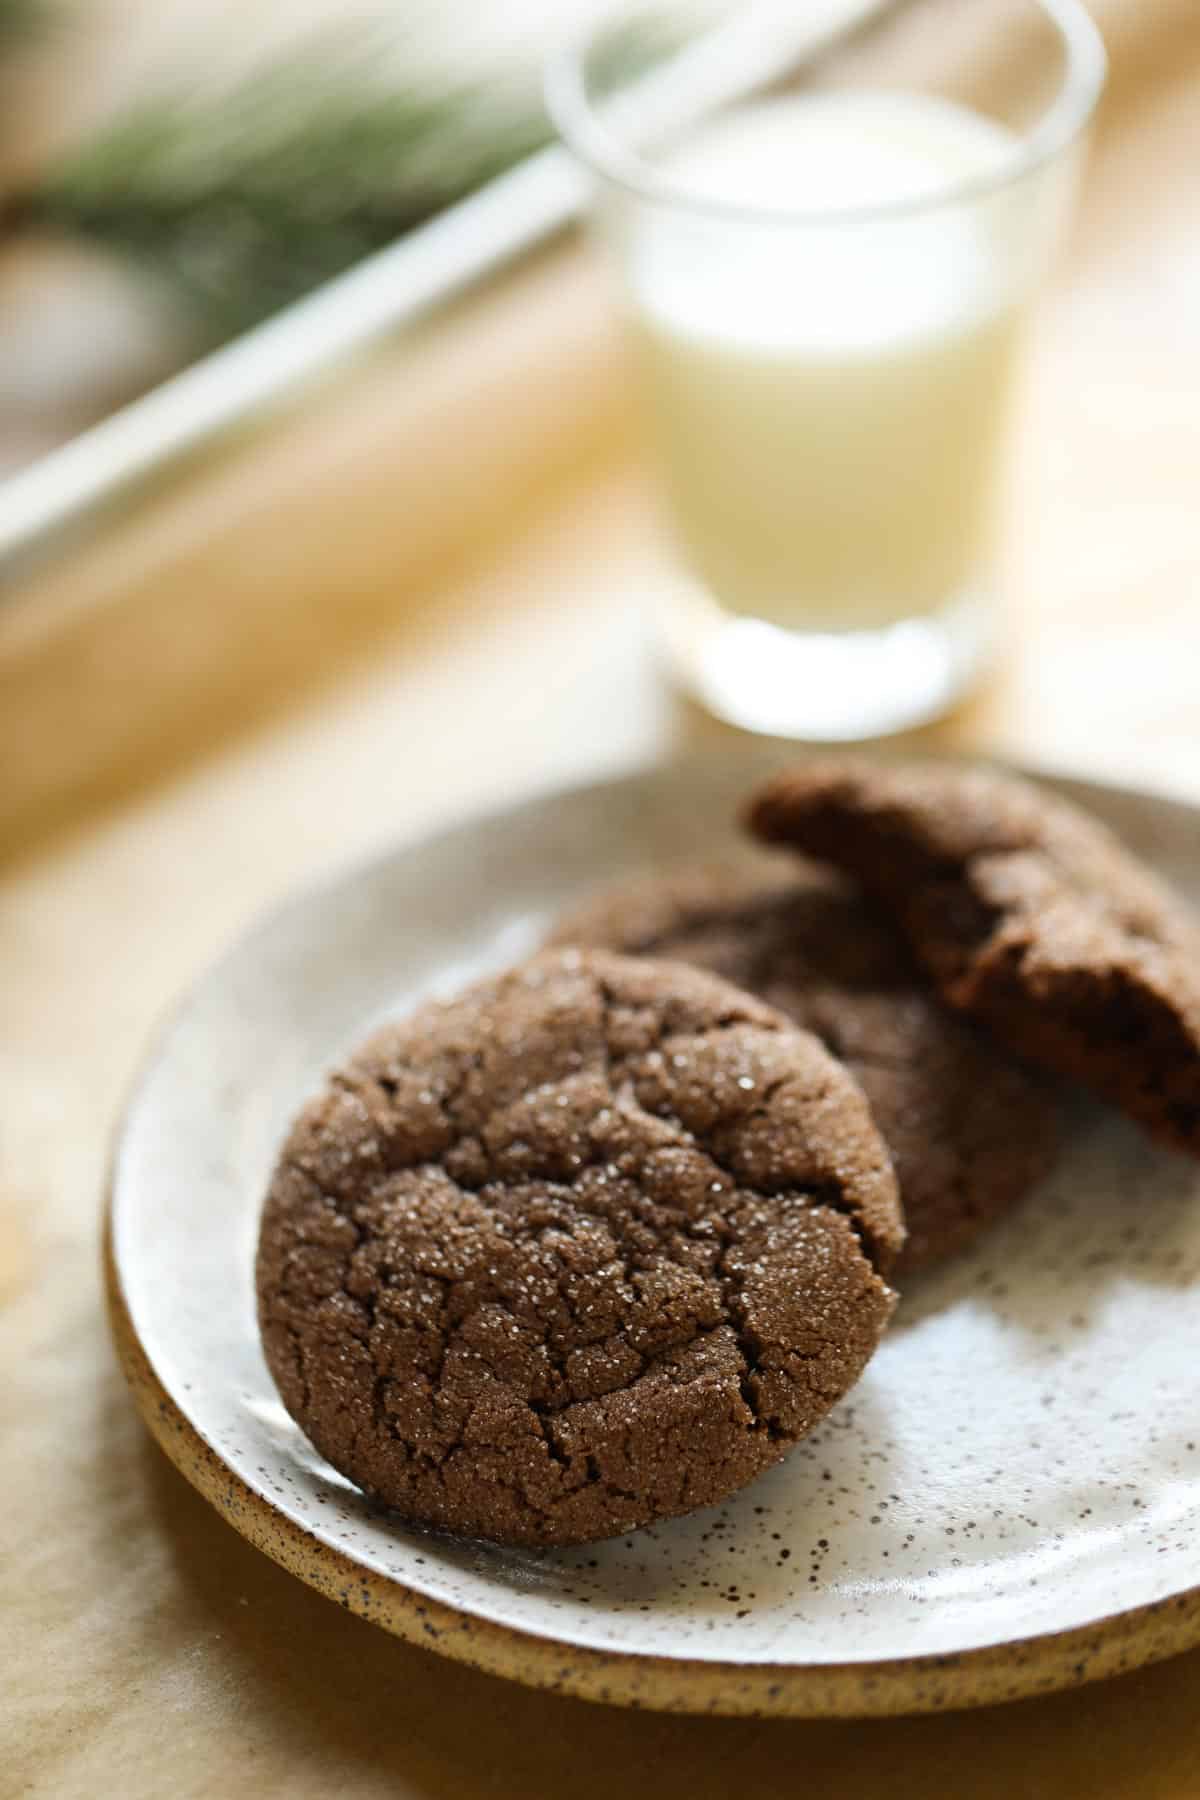 Two cracked chocolate cookies on a plate